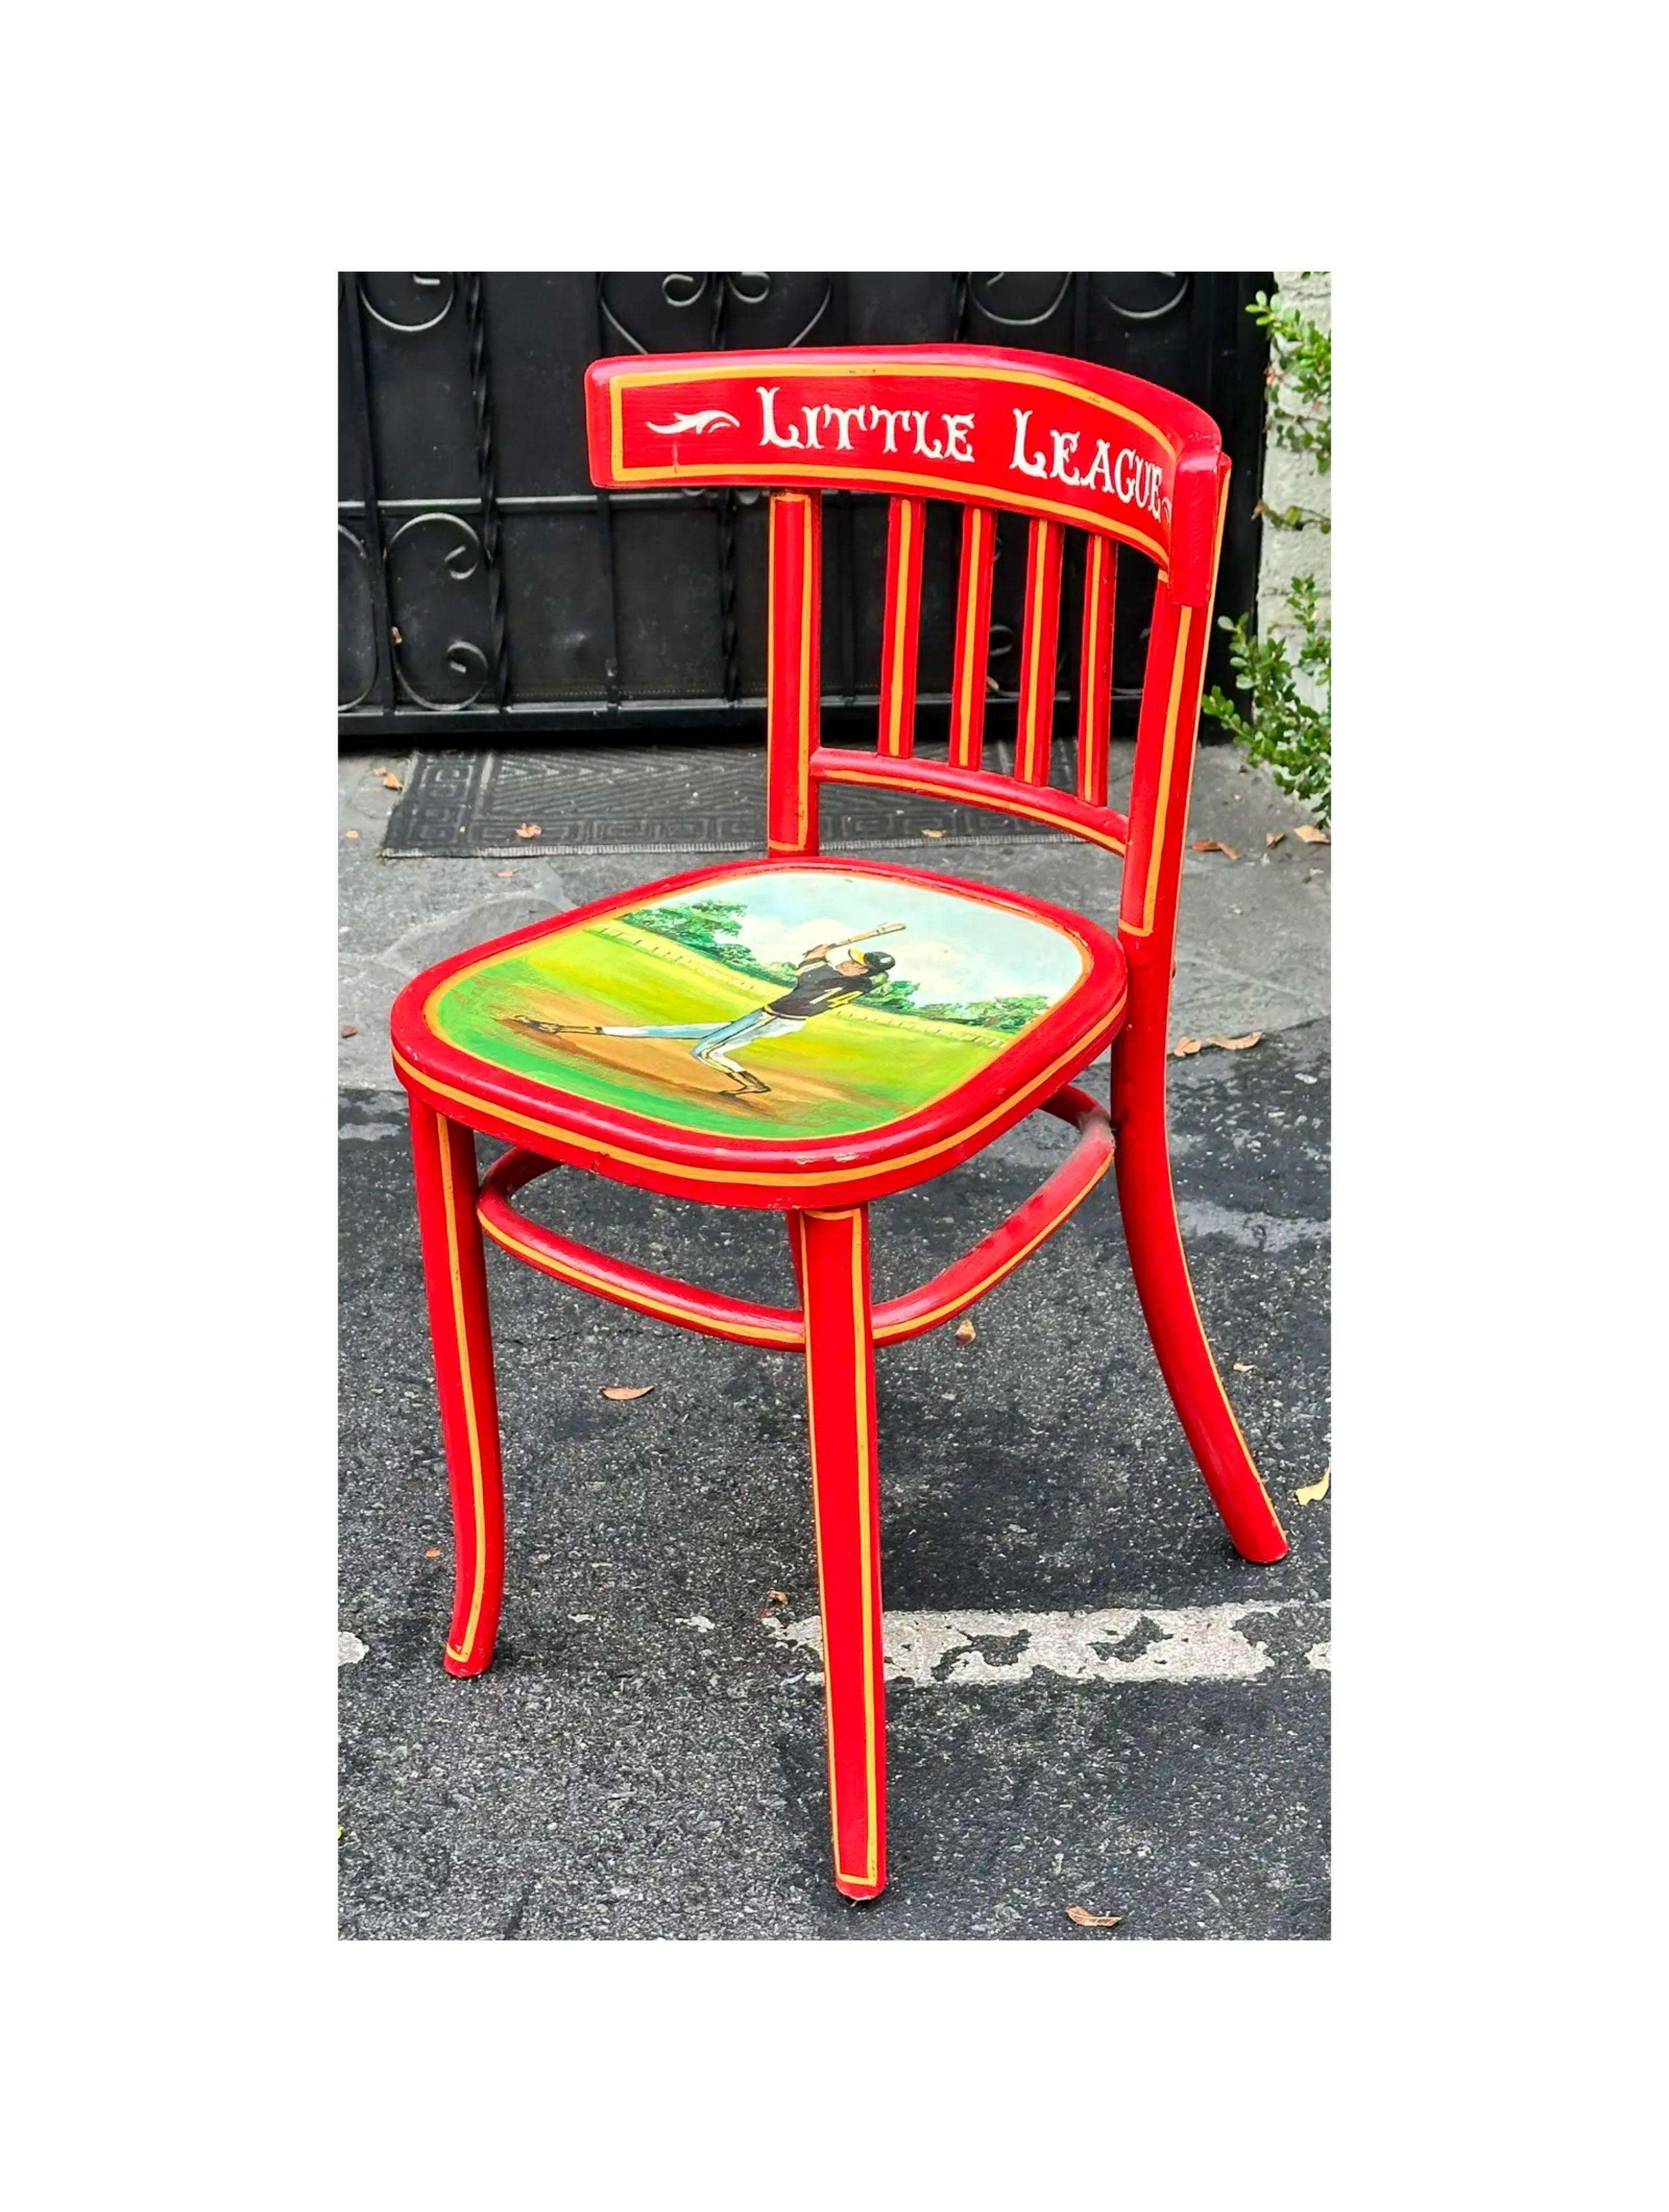 Vintage hand painted little league baseball red klismos chair. It is a very unusual example with a baseball player painting on the seat and the words Little League painted on the seat back. 

Additional information: 
Materials: Paint,